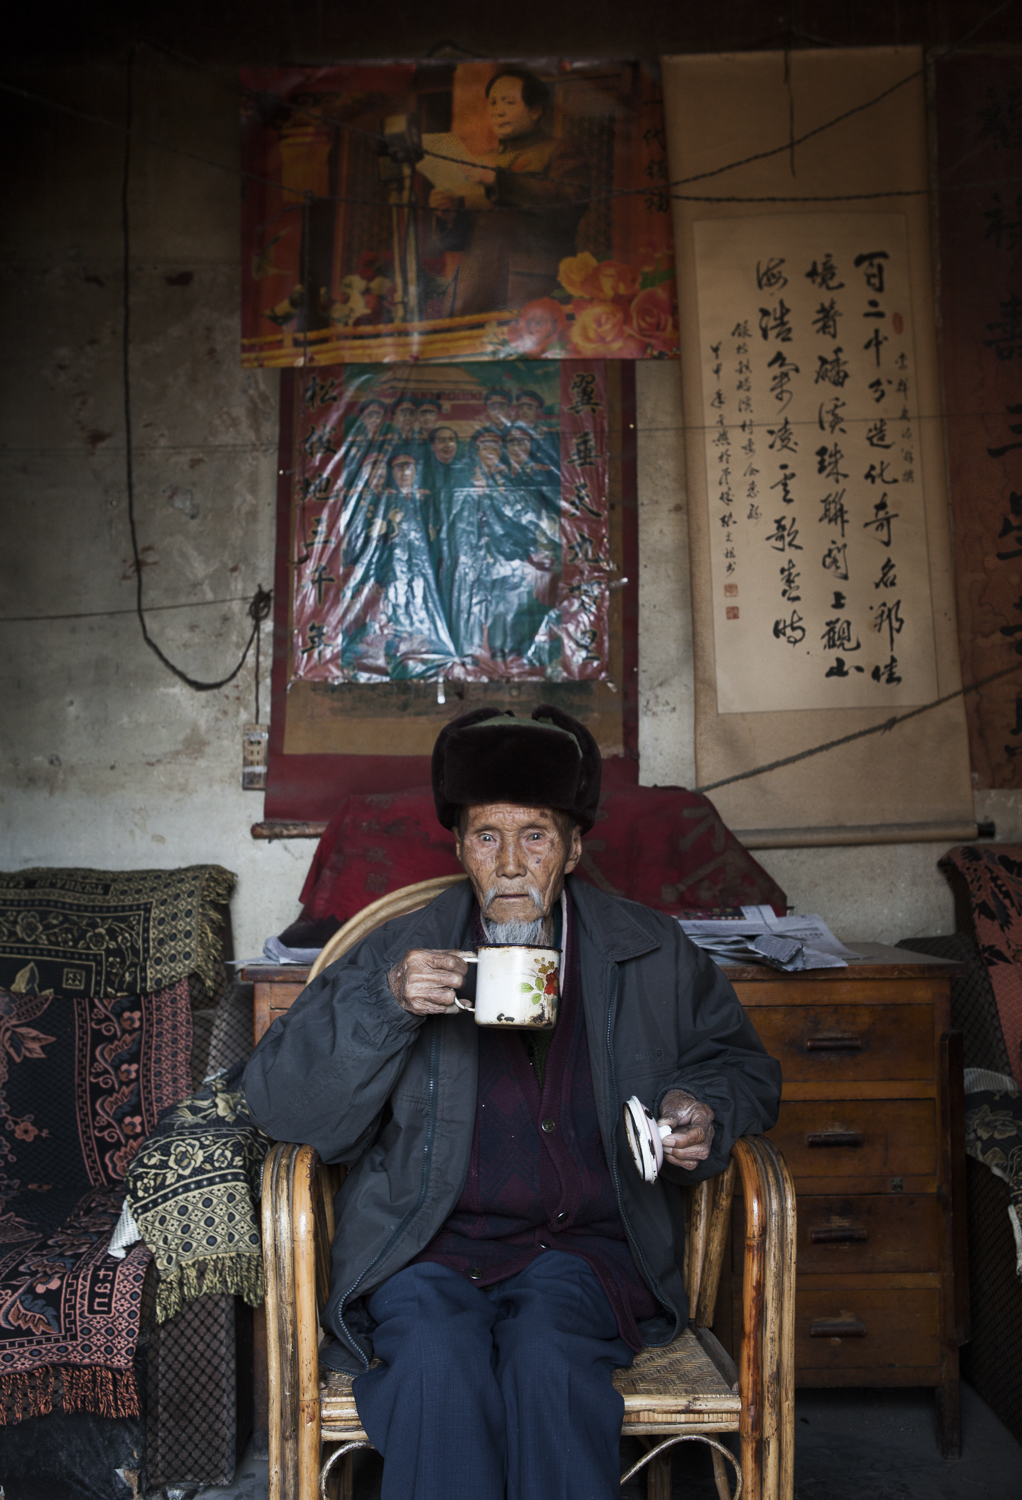  Beipang cun, Yunnan.&nbsp; On the left, a village elder and leader sits for a portait in the local temple.&nbsp; This temple is 160 years old and has never been renovated.&nbsp; On the right, a detail shot of the temple's entry way.&nbsp; 